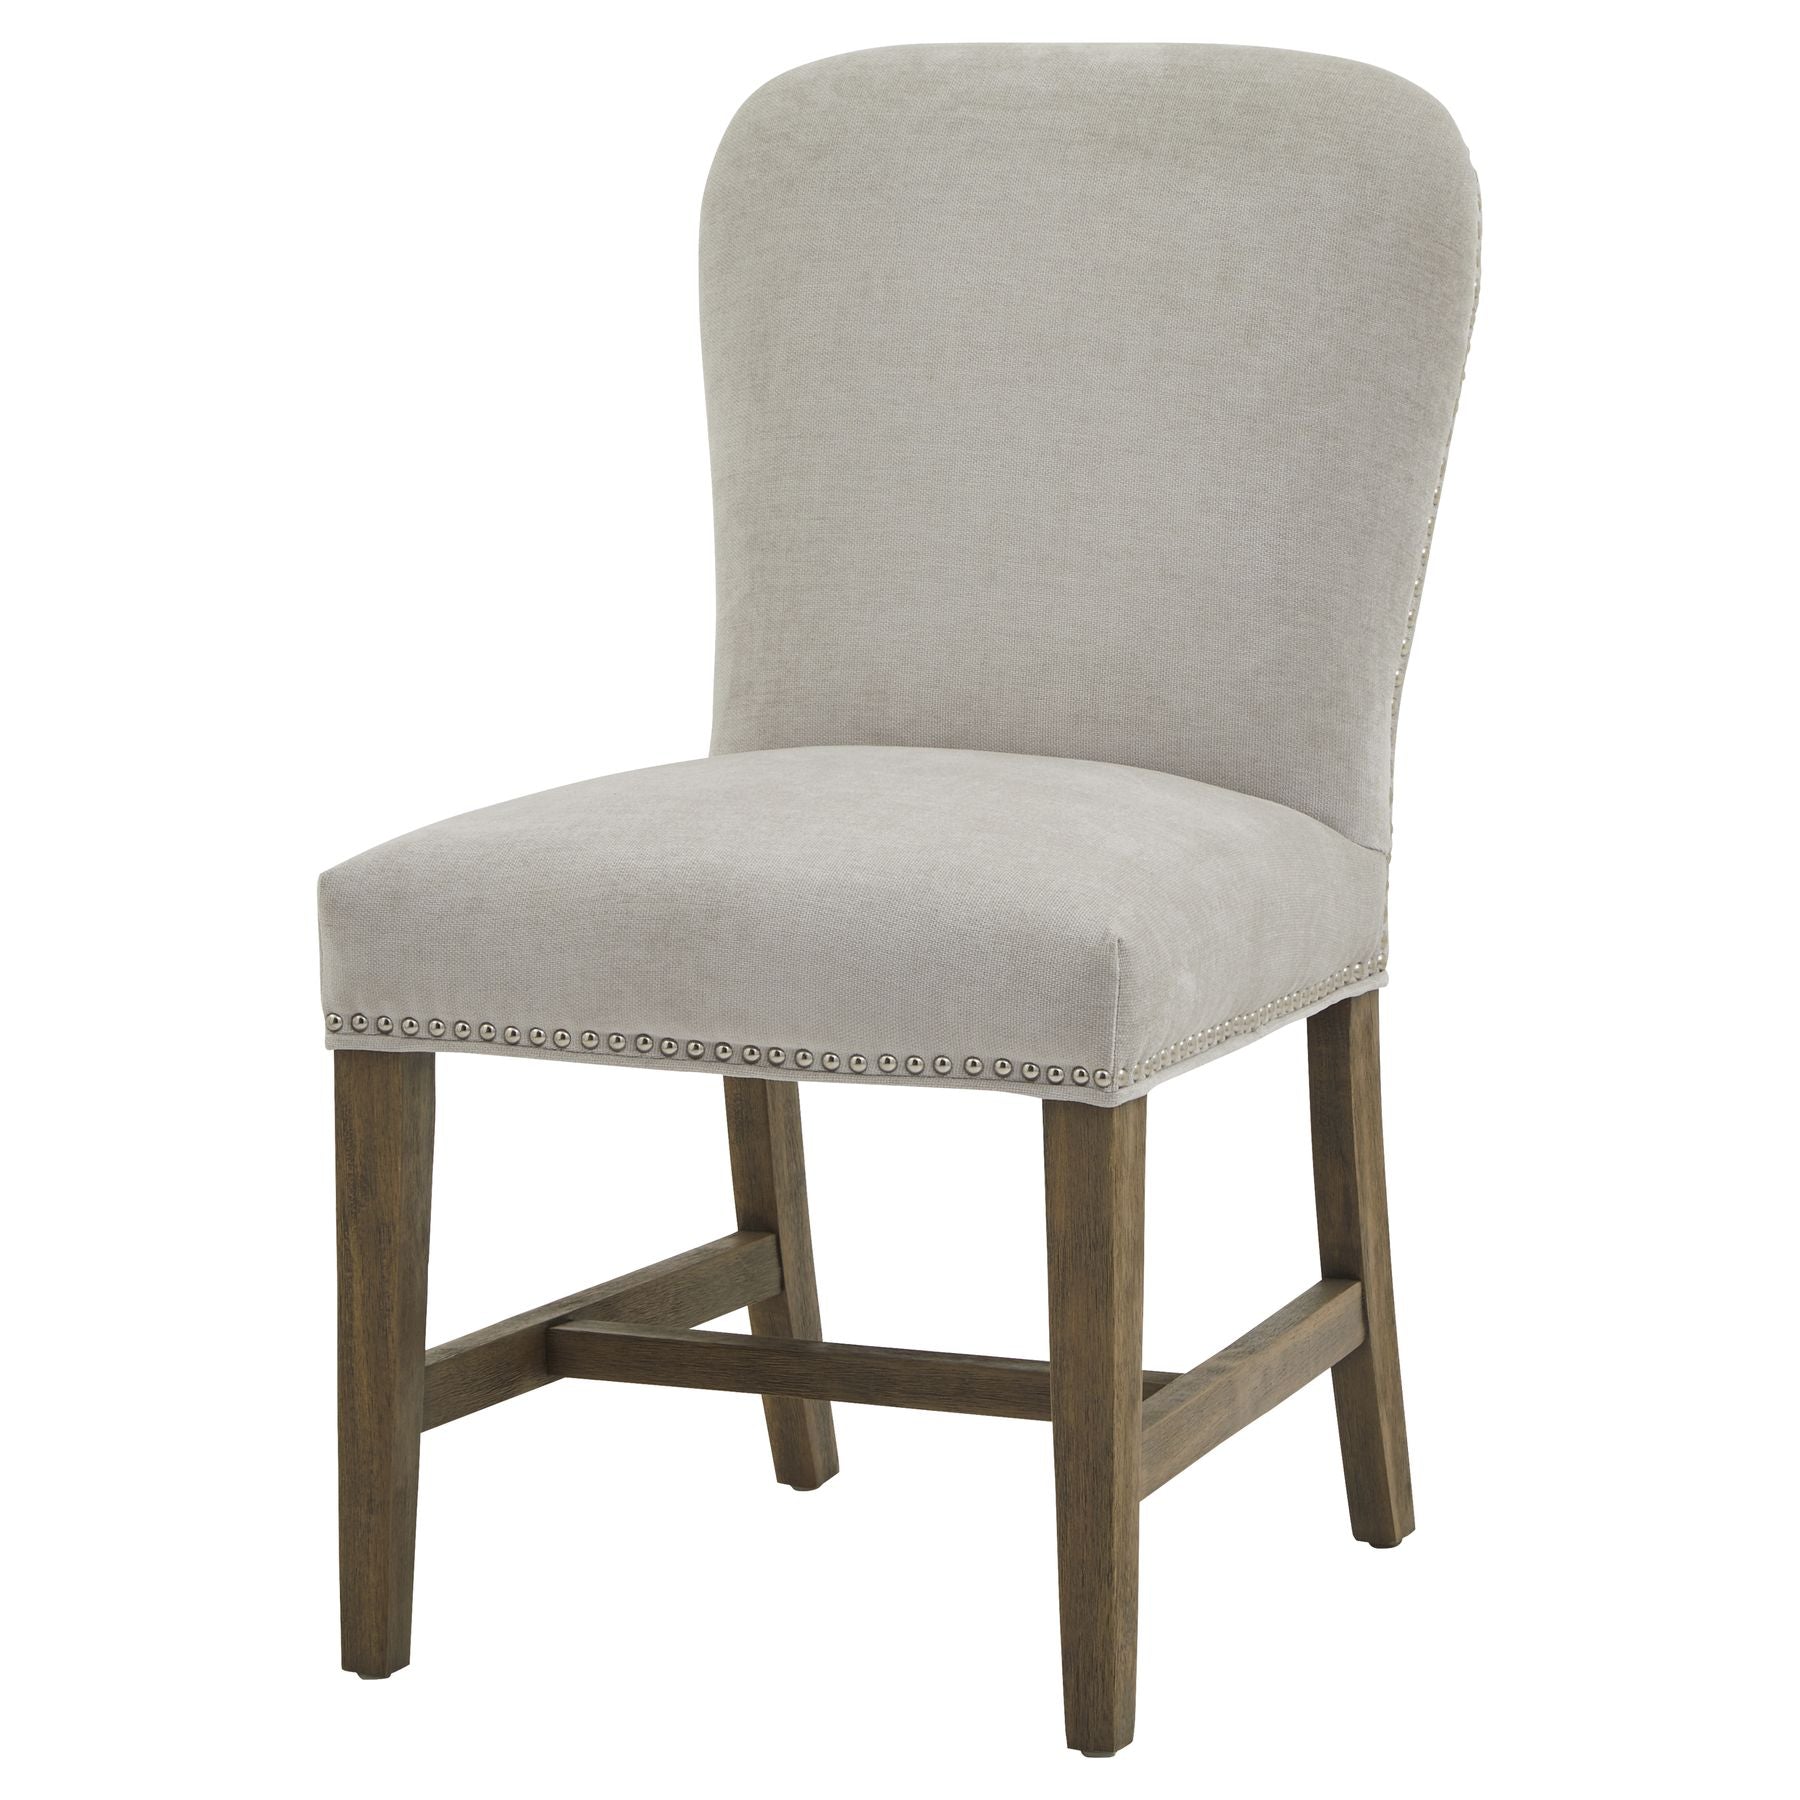 View Cobham Grey Dining Chair information